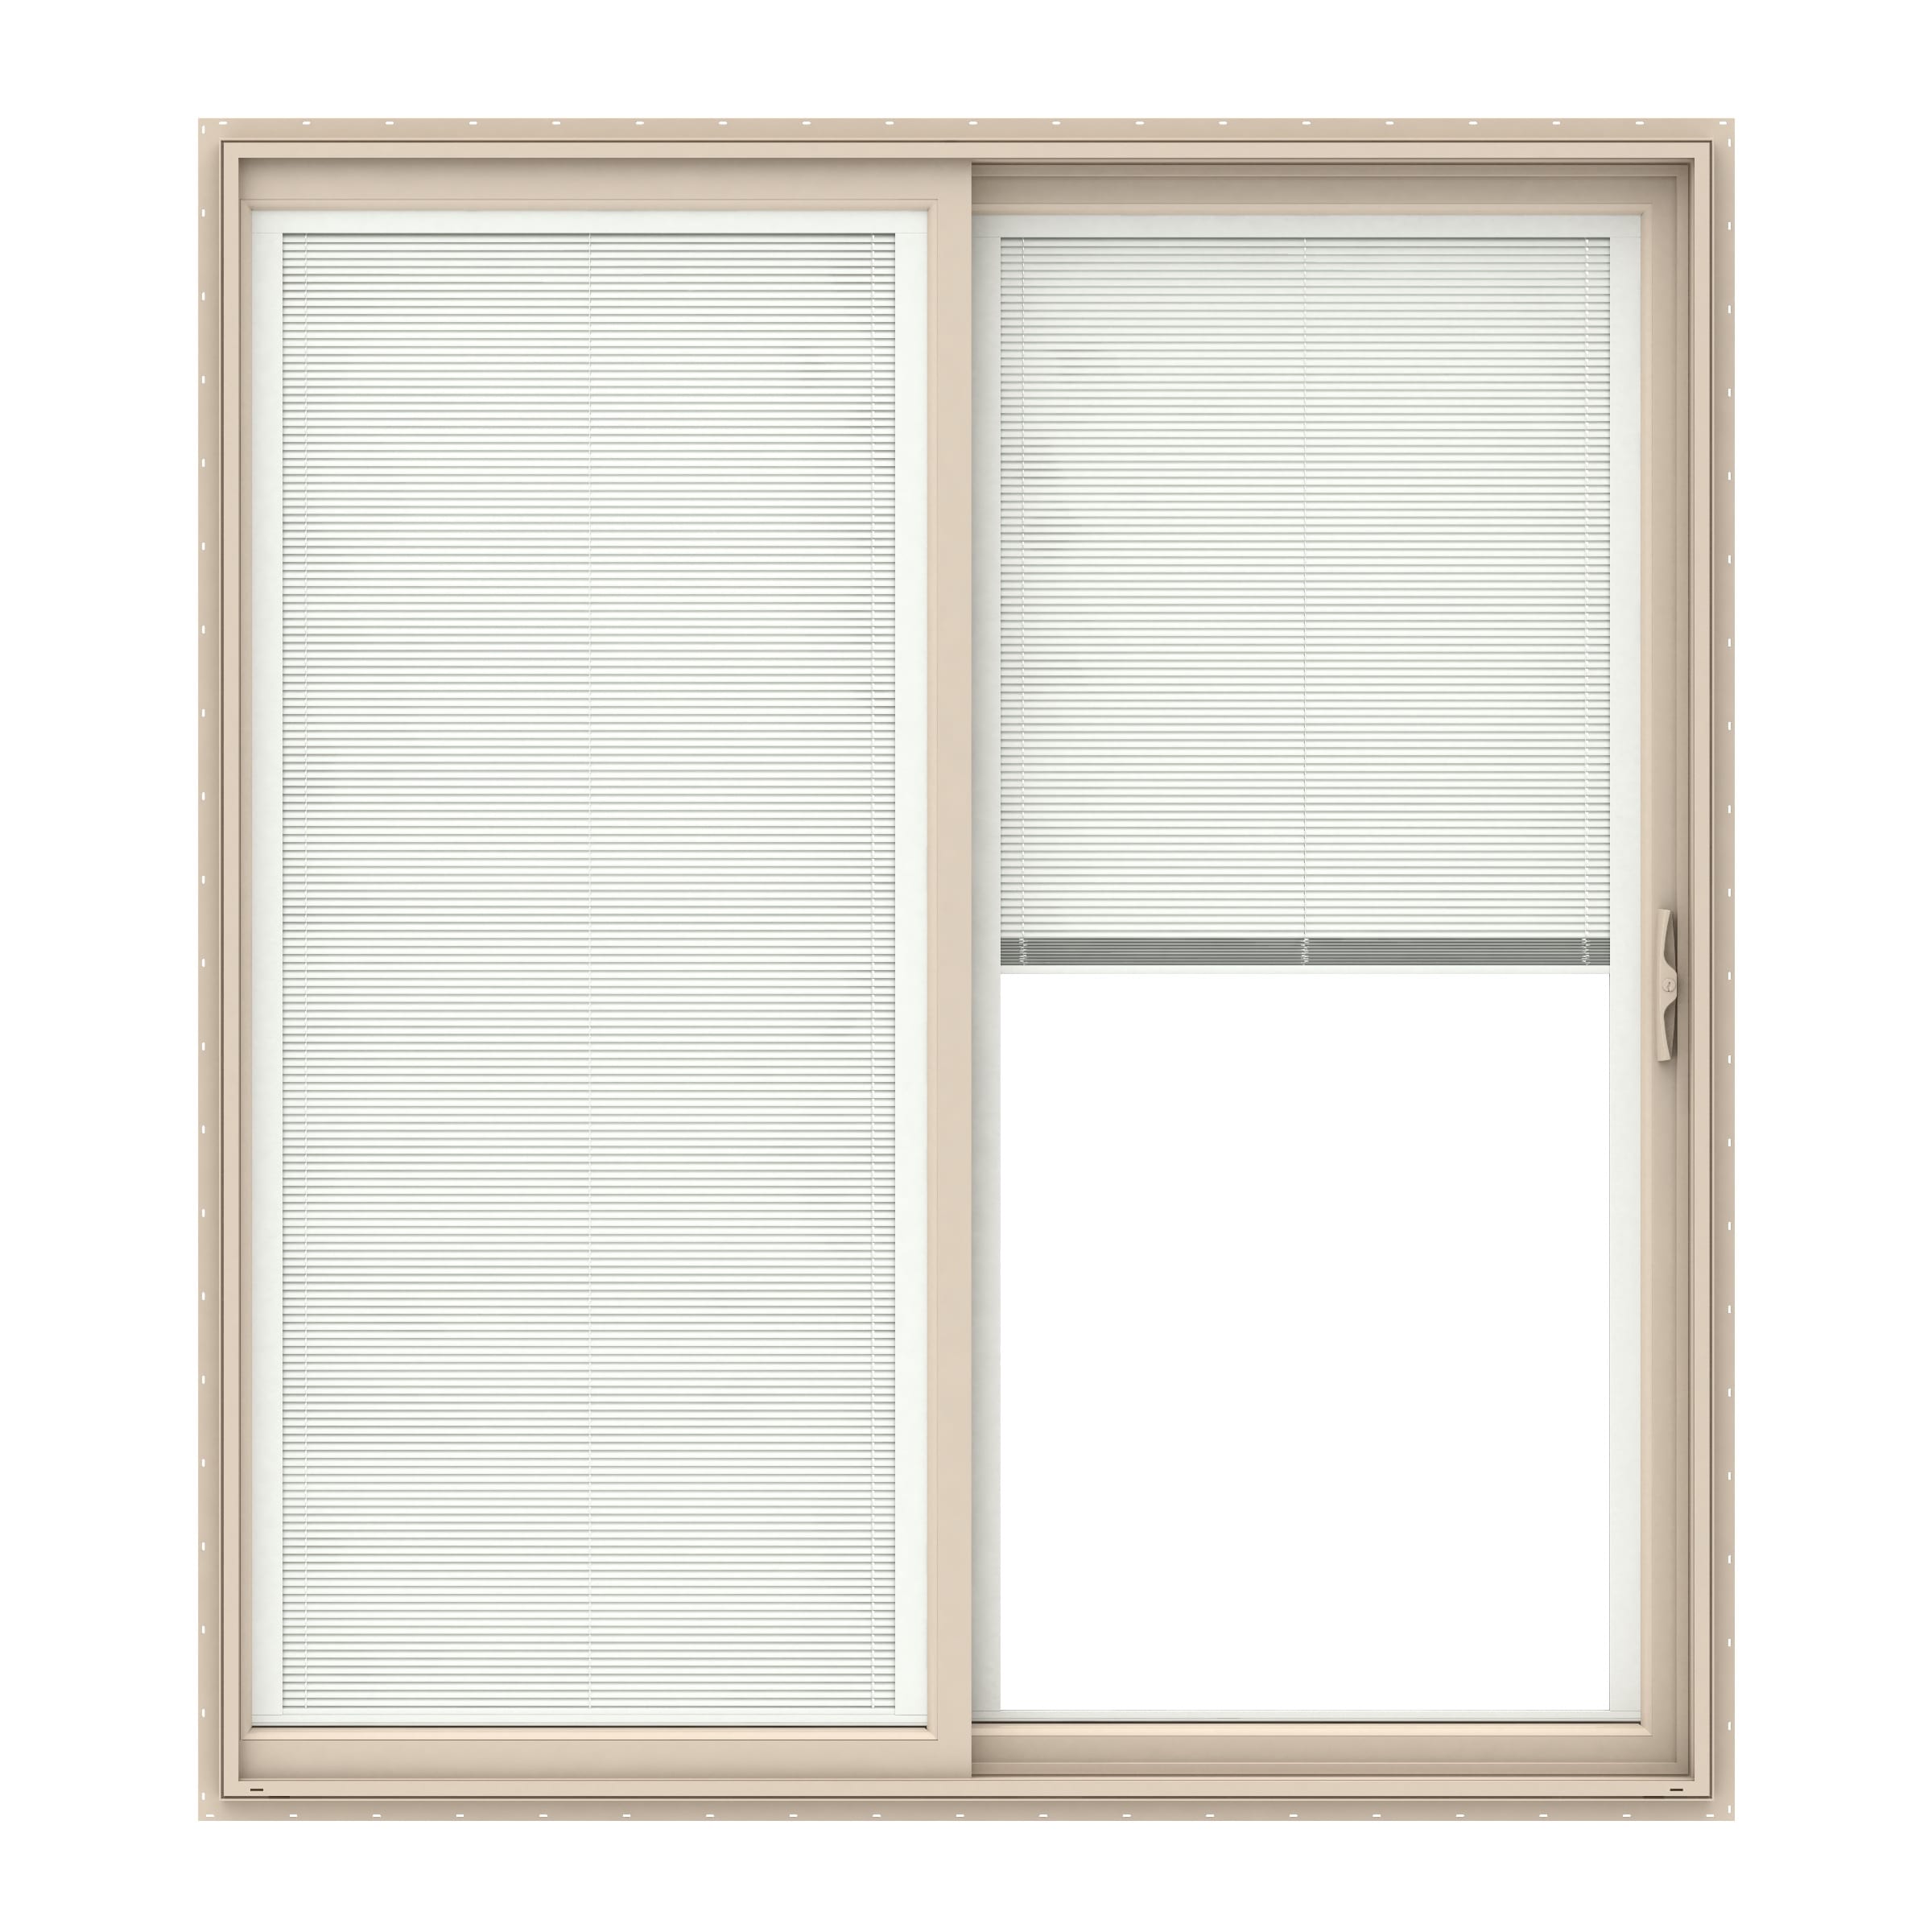 150 Series 60-in x 80-in Low-e Blinds Between The Glass Almond Vinyl Sliding Right-Hand Sliding Double Patio Door in Brown | - Pella 1000010515